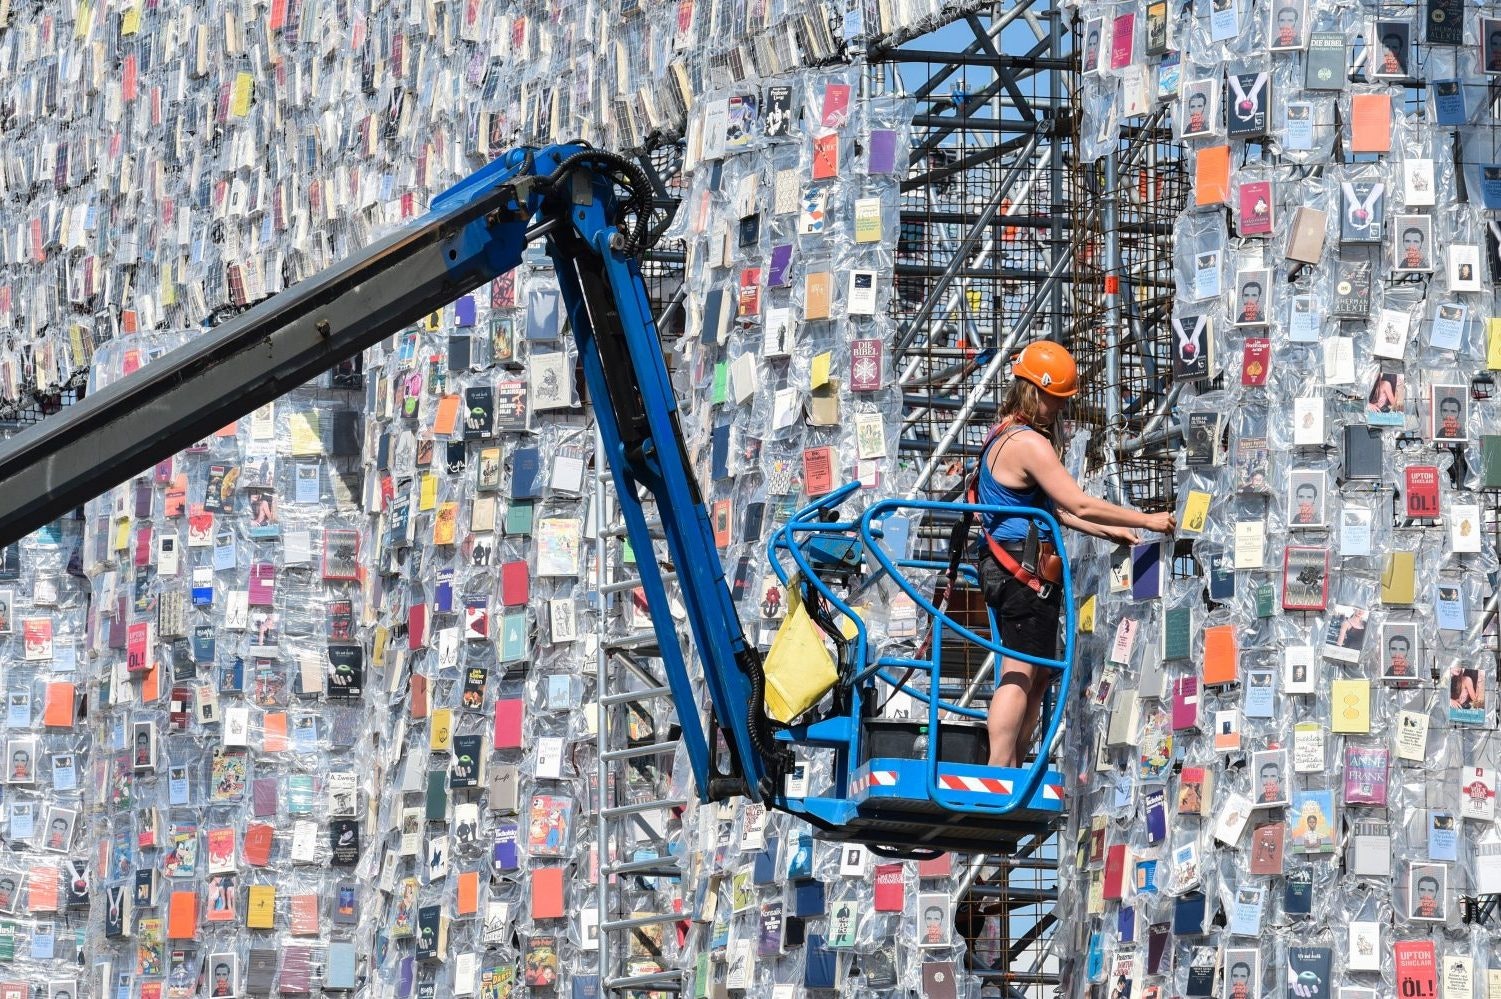 A volunteer uses a mobile lift to hang books on the "Parthenon of Books" by Argentinian artist Marta Minujin. Image: John MacDougall/AFP/Getty Images